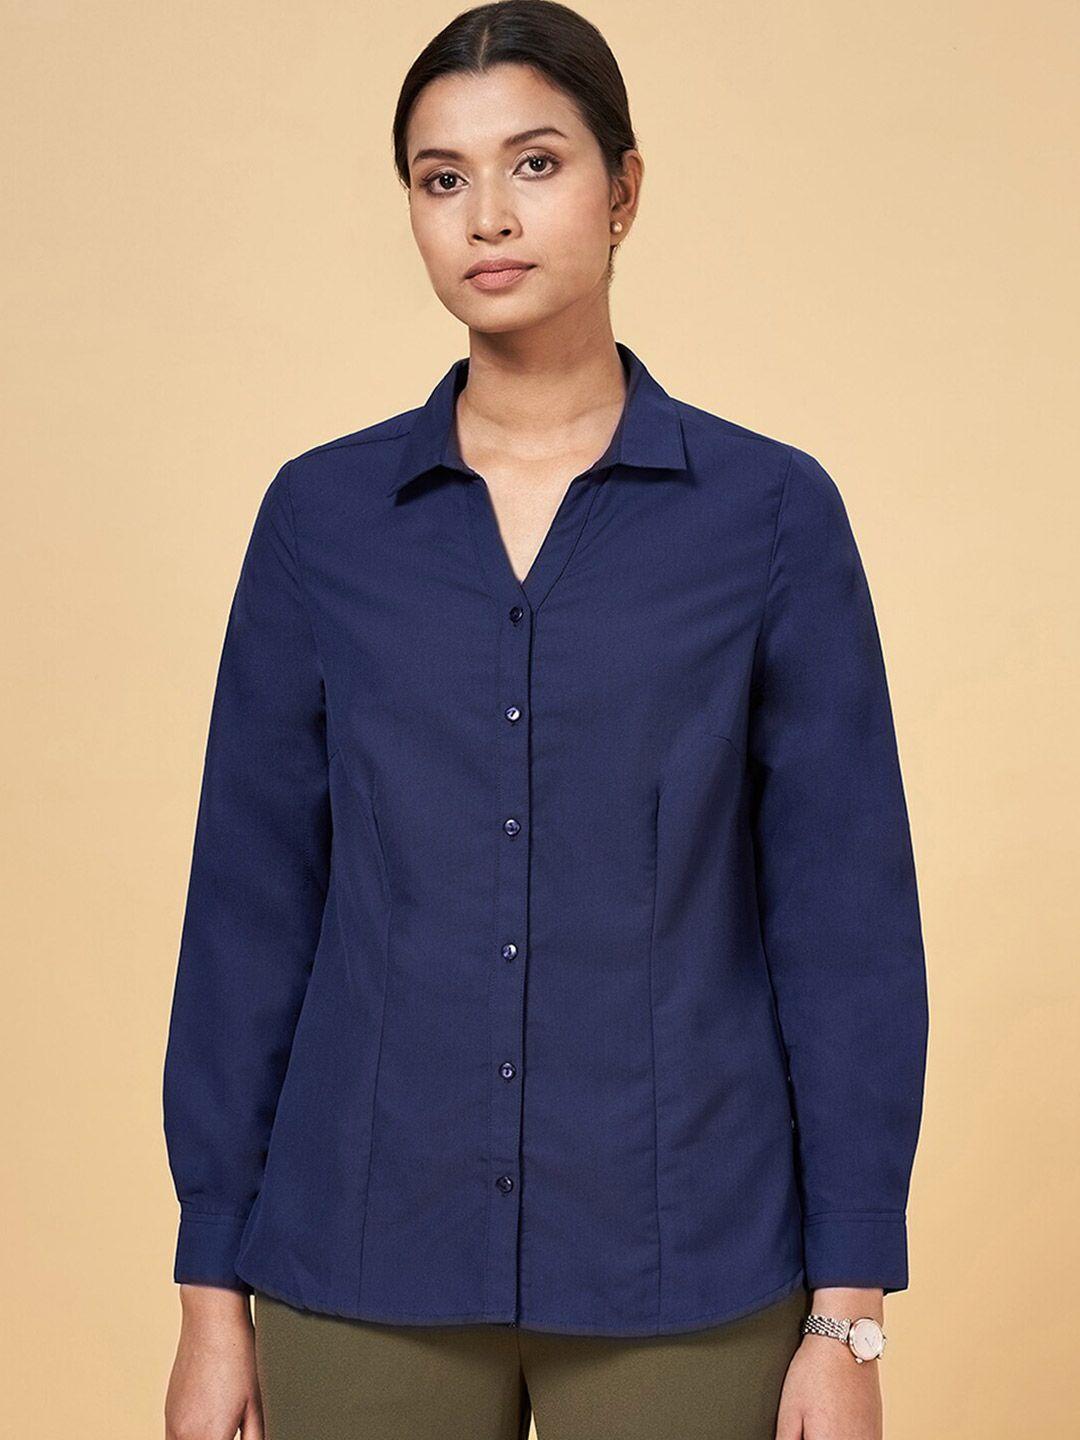 annabelle-by-pantaloons-women-navy-blue-opaque-formal-shirt